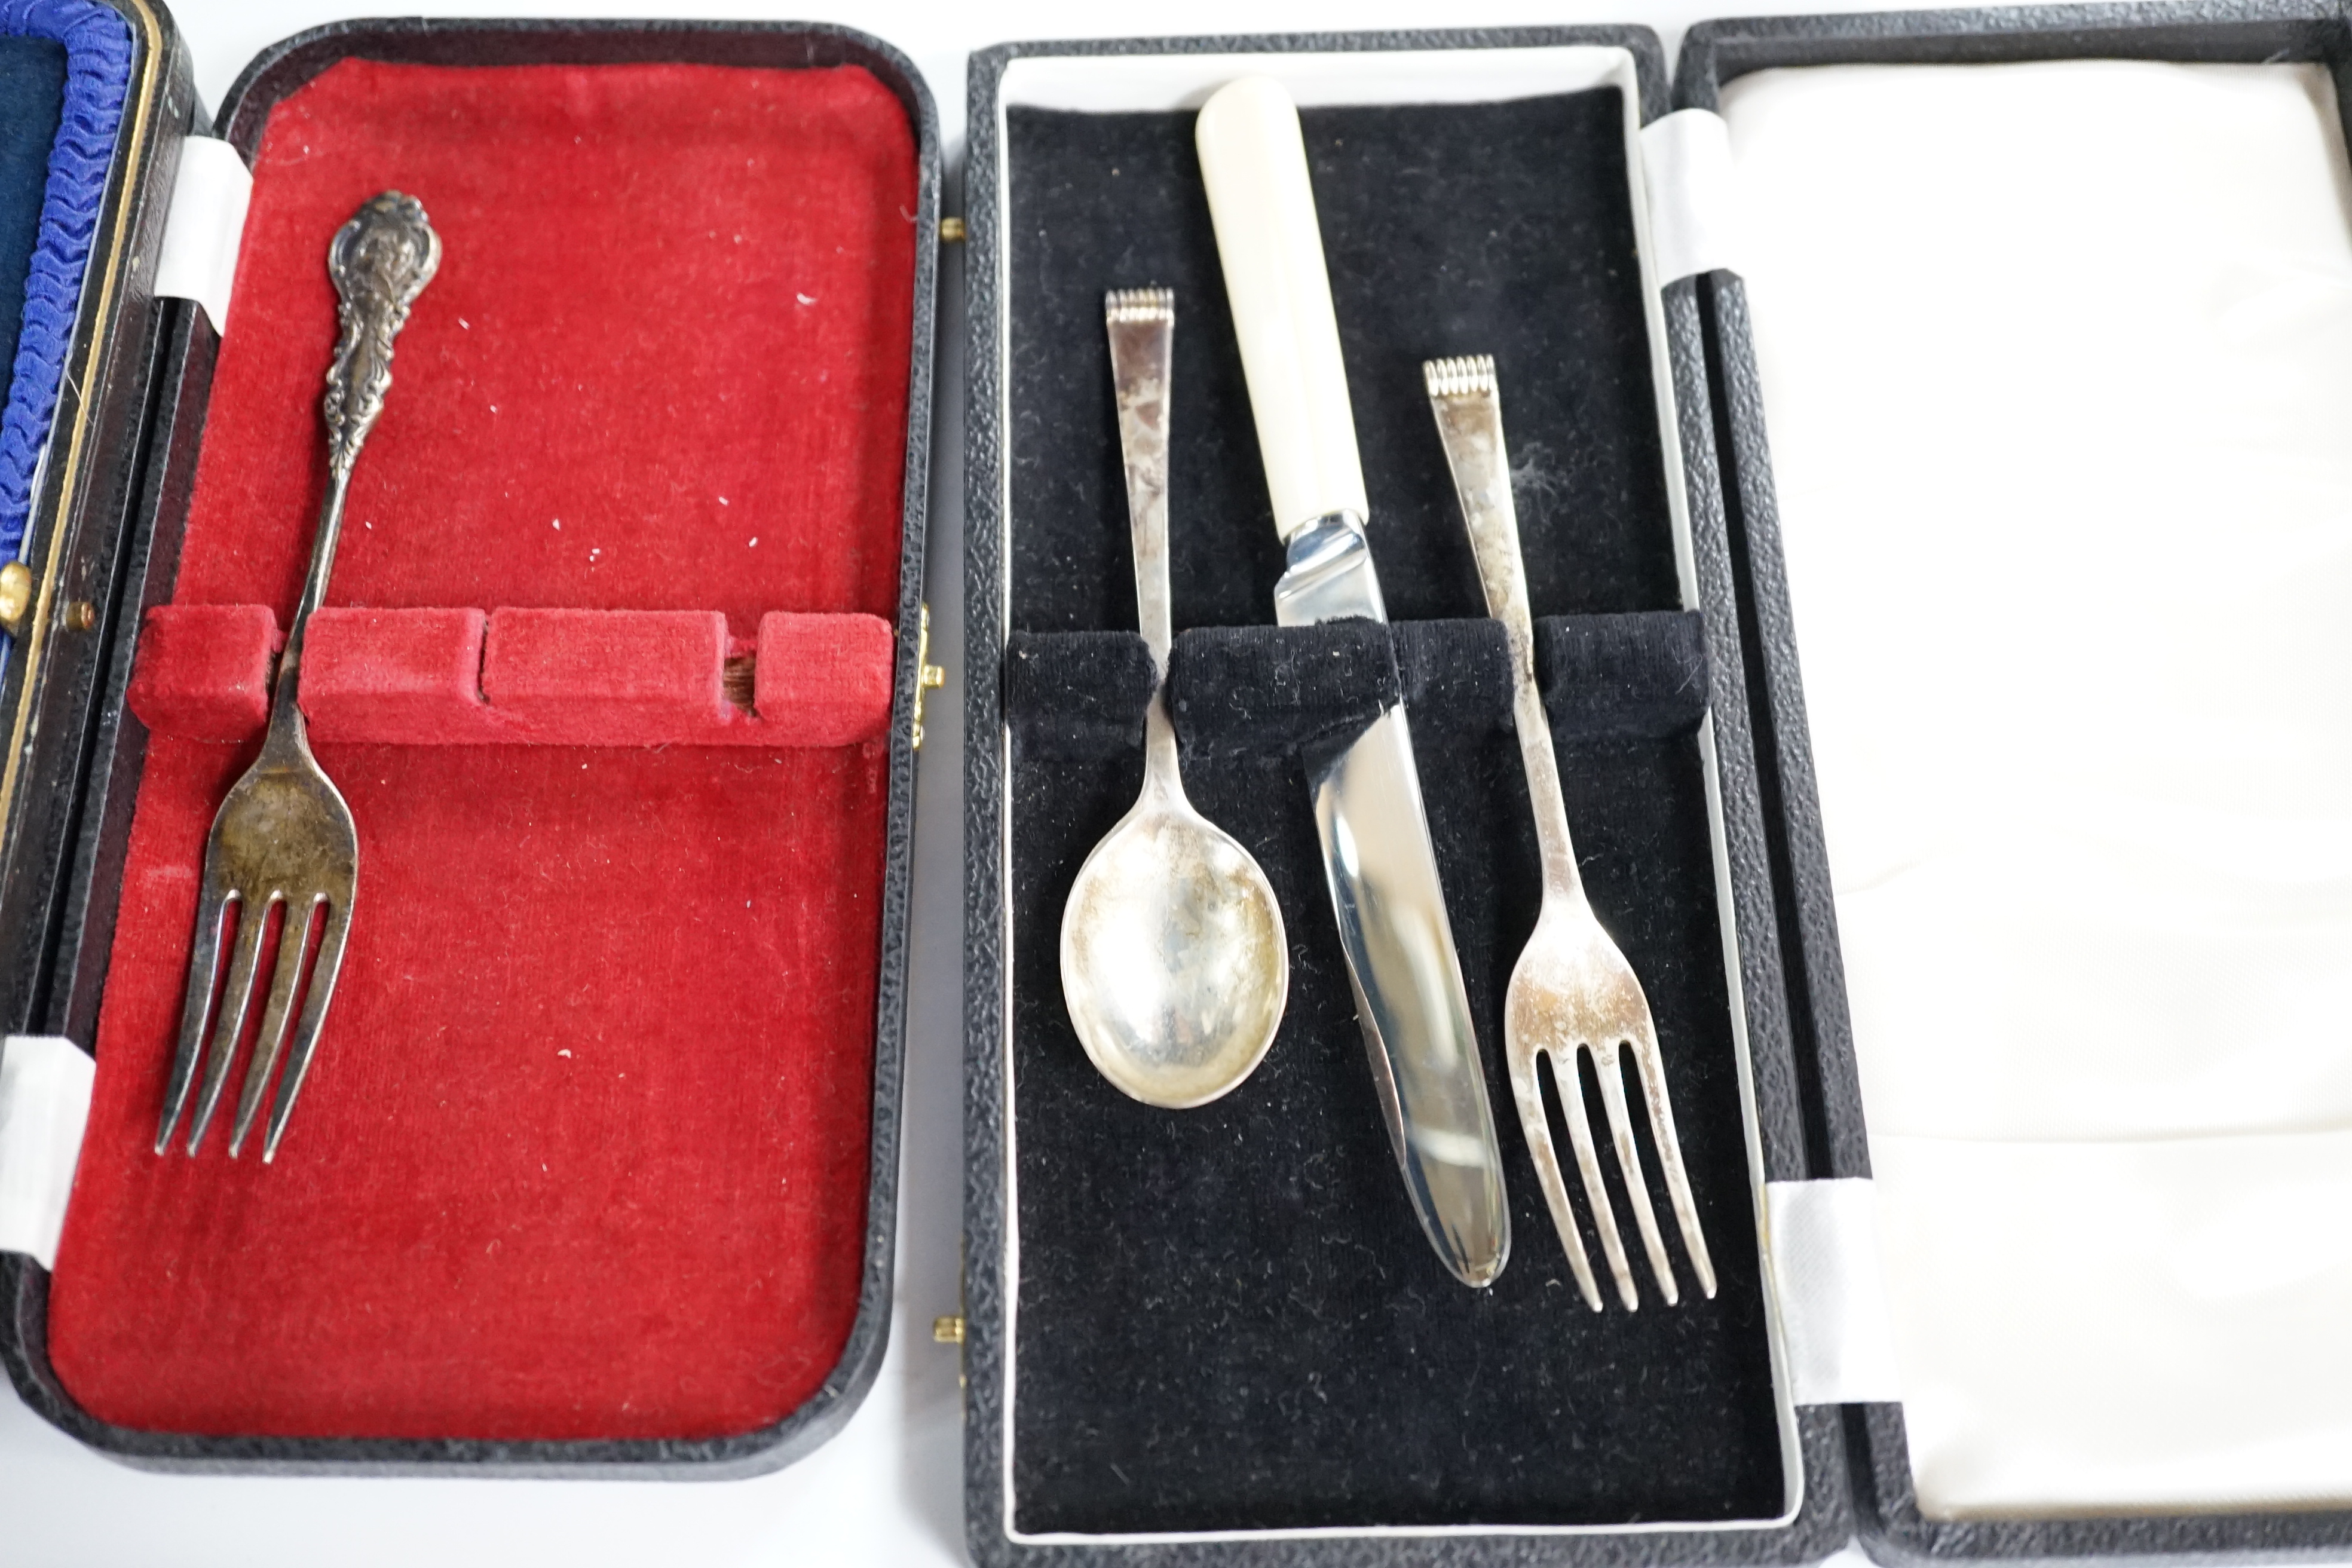 A cased set of six mid 20th century silver teaspoons, a cased silver spoon and pusher, two cased silver christening sets, a boxed silver spoon and one other incomplete cased set. Condition - poor to fair